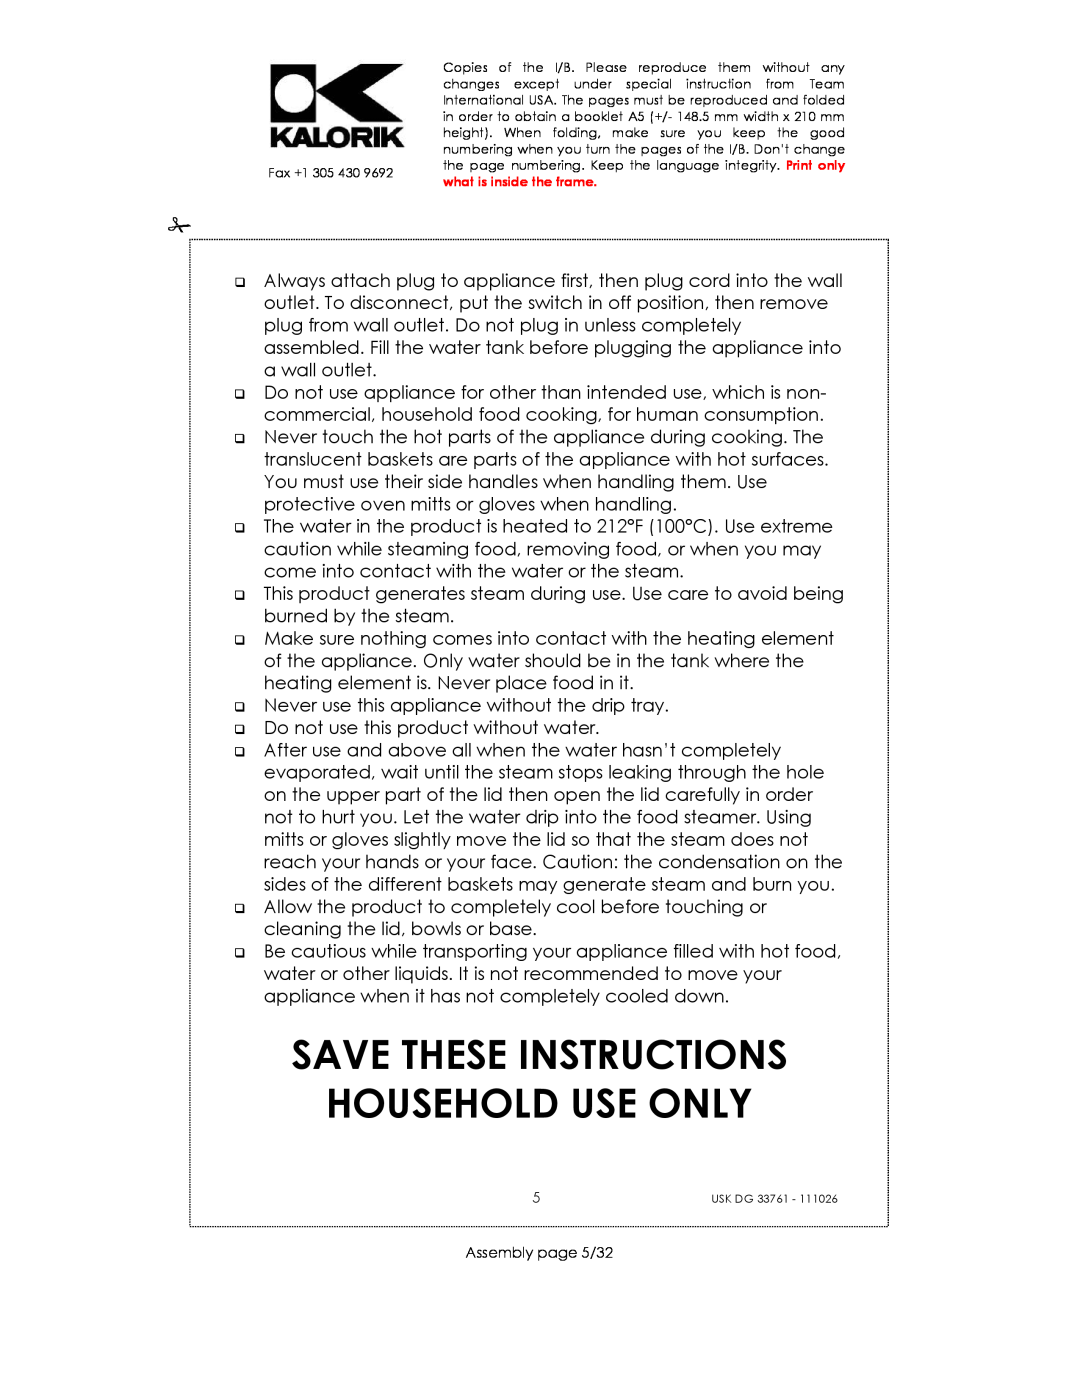 Kalorik USK DG 33761 manual Save These Instructions Household Use Only 